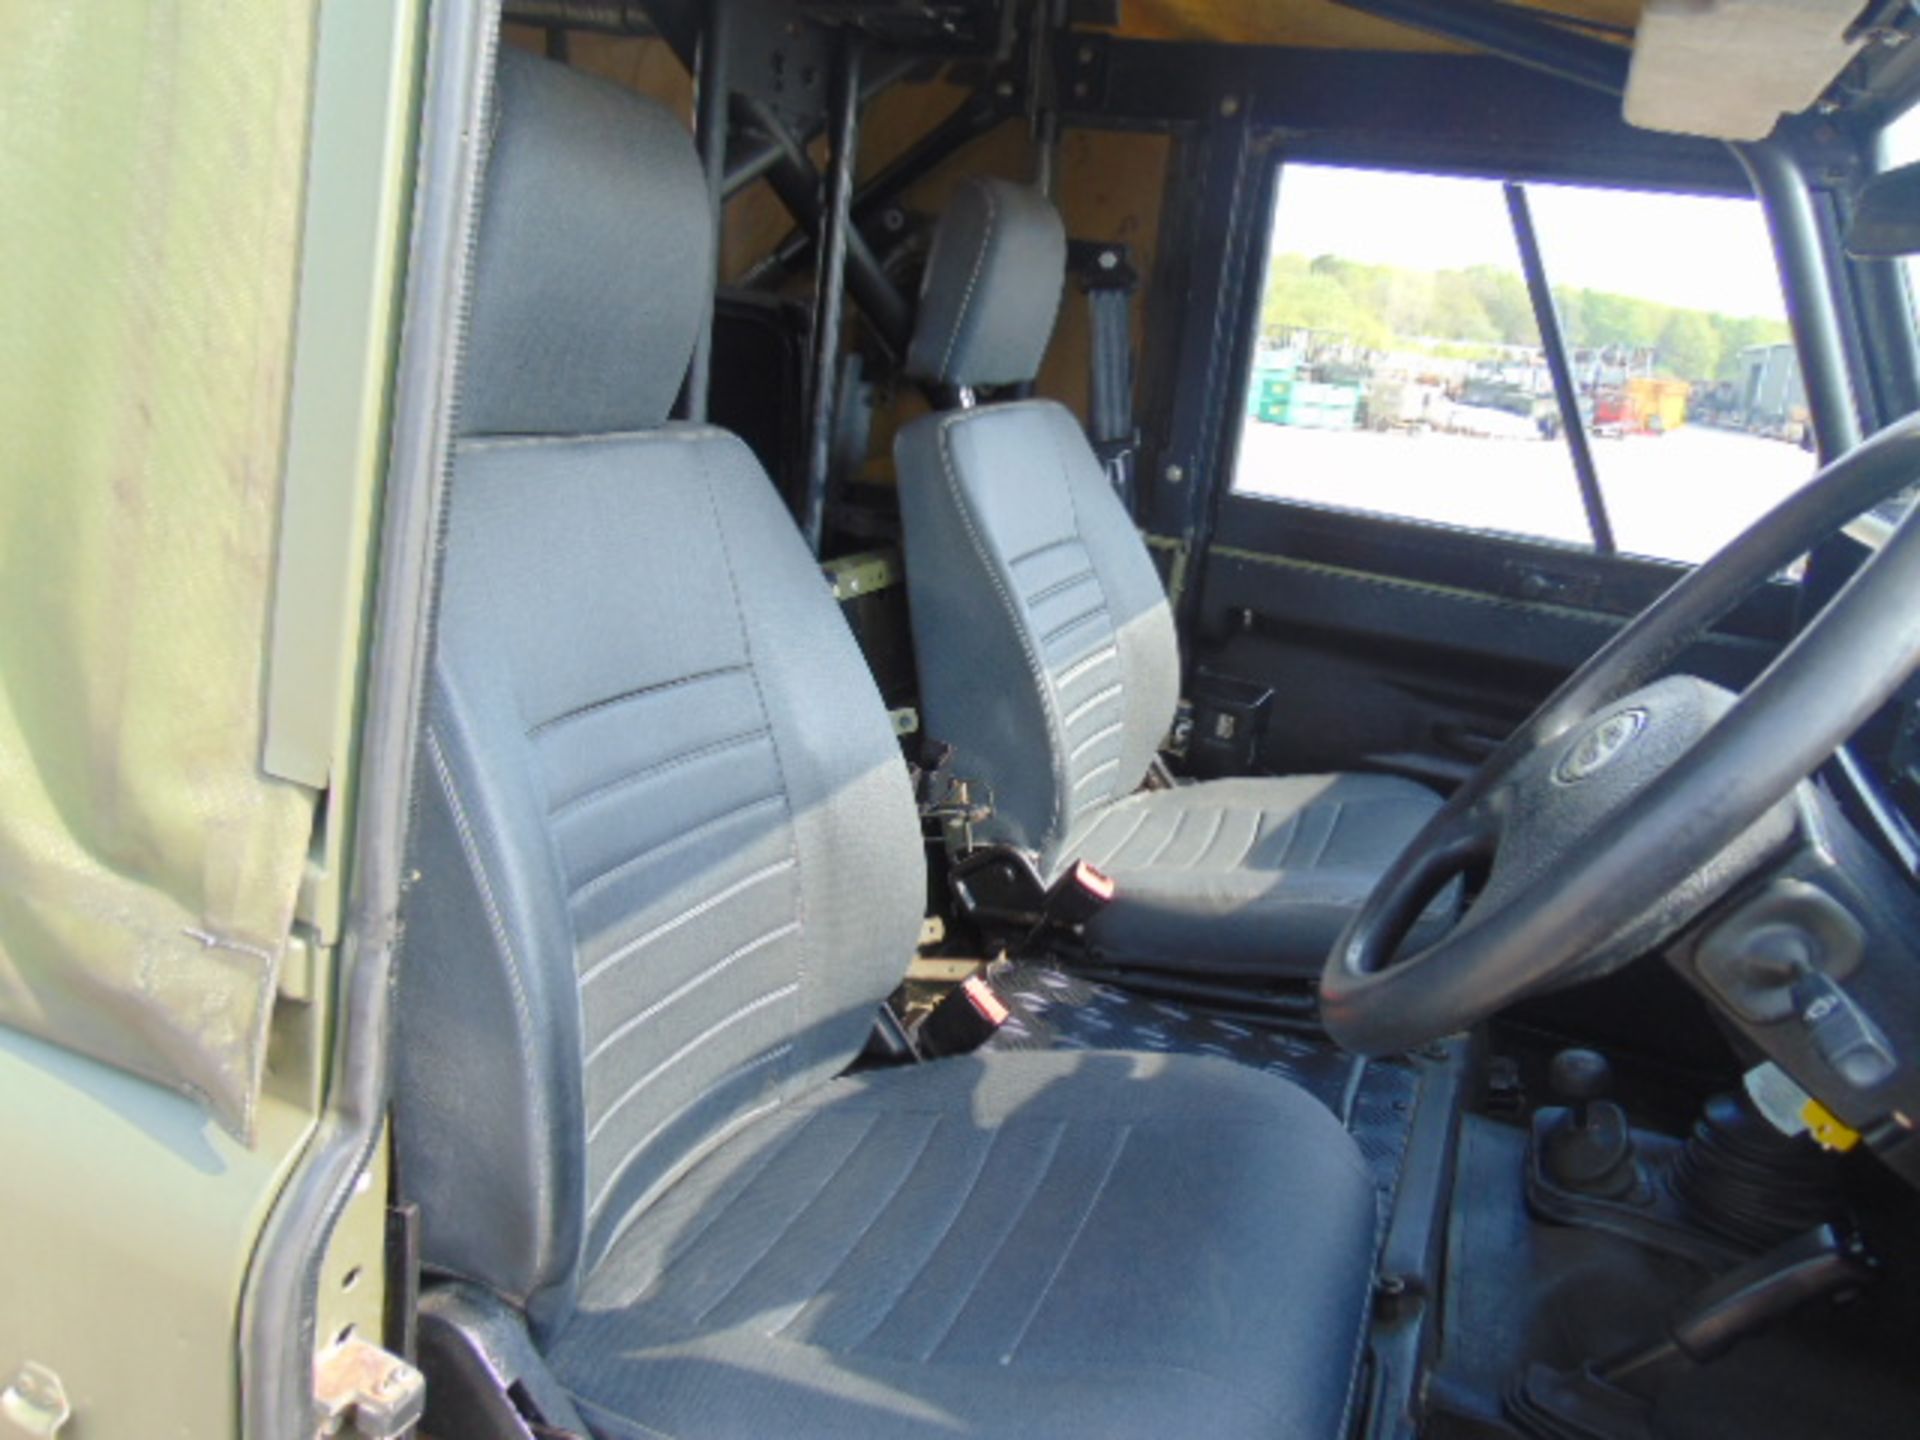 Military Specification Land Rover Wolf 90 Soft Top - Image 12 of 26